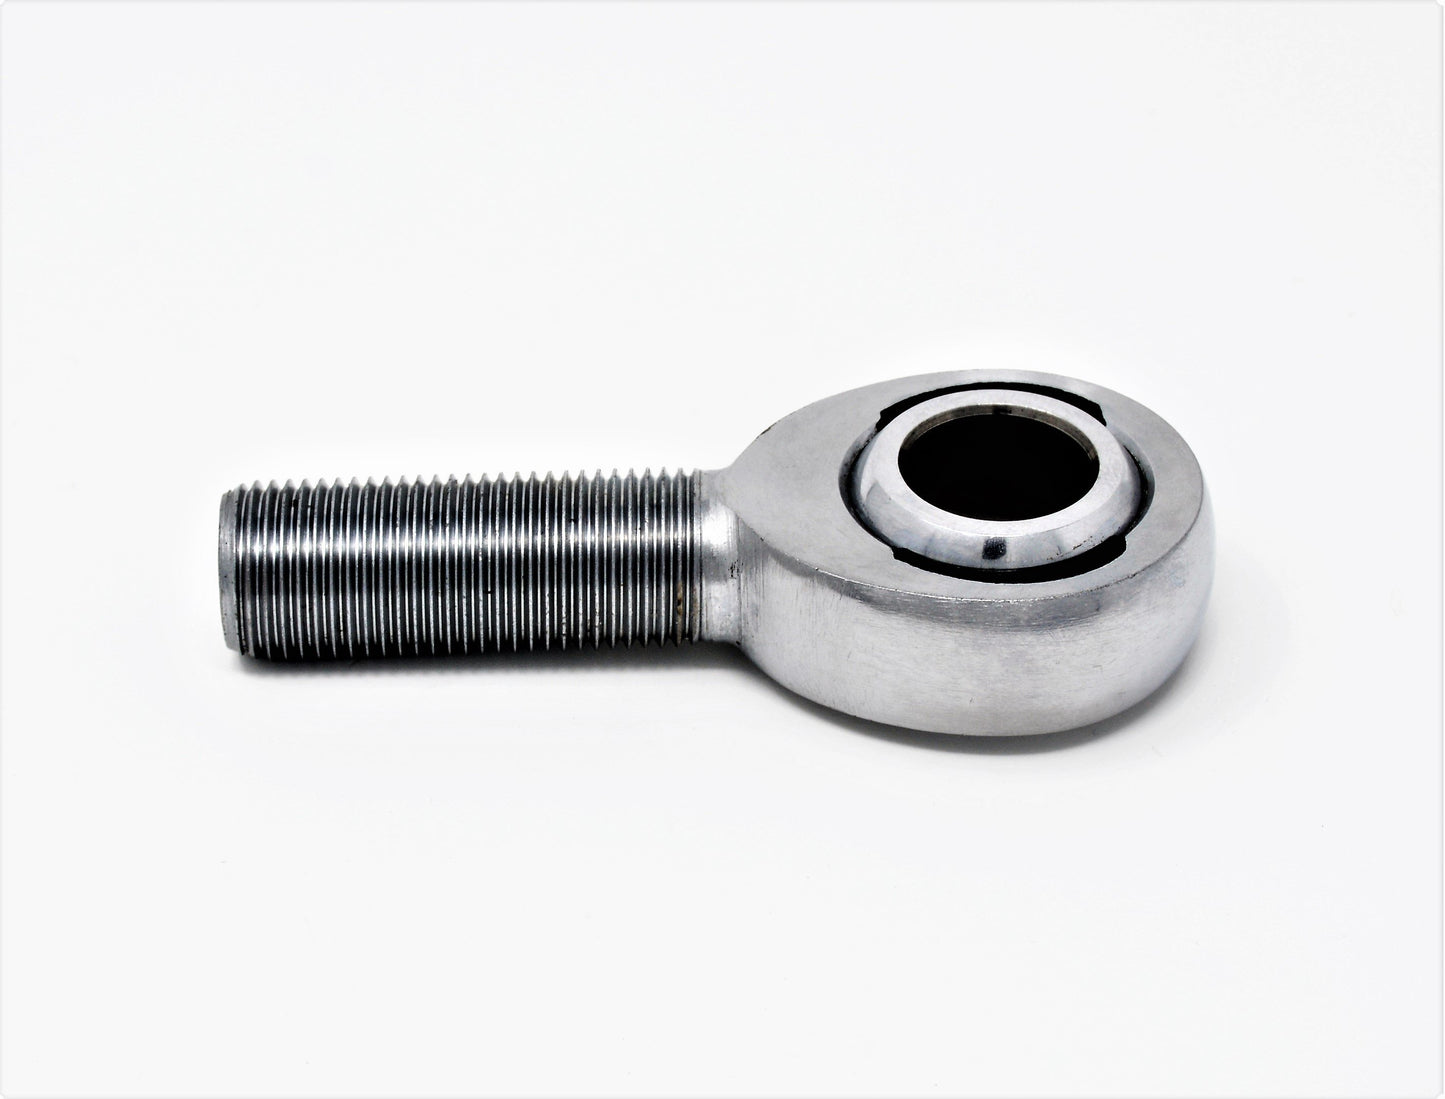 .750" 3/4” Rod End Heim Joint Right hand thread with jam nut (Normal Thread)